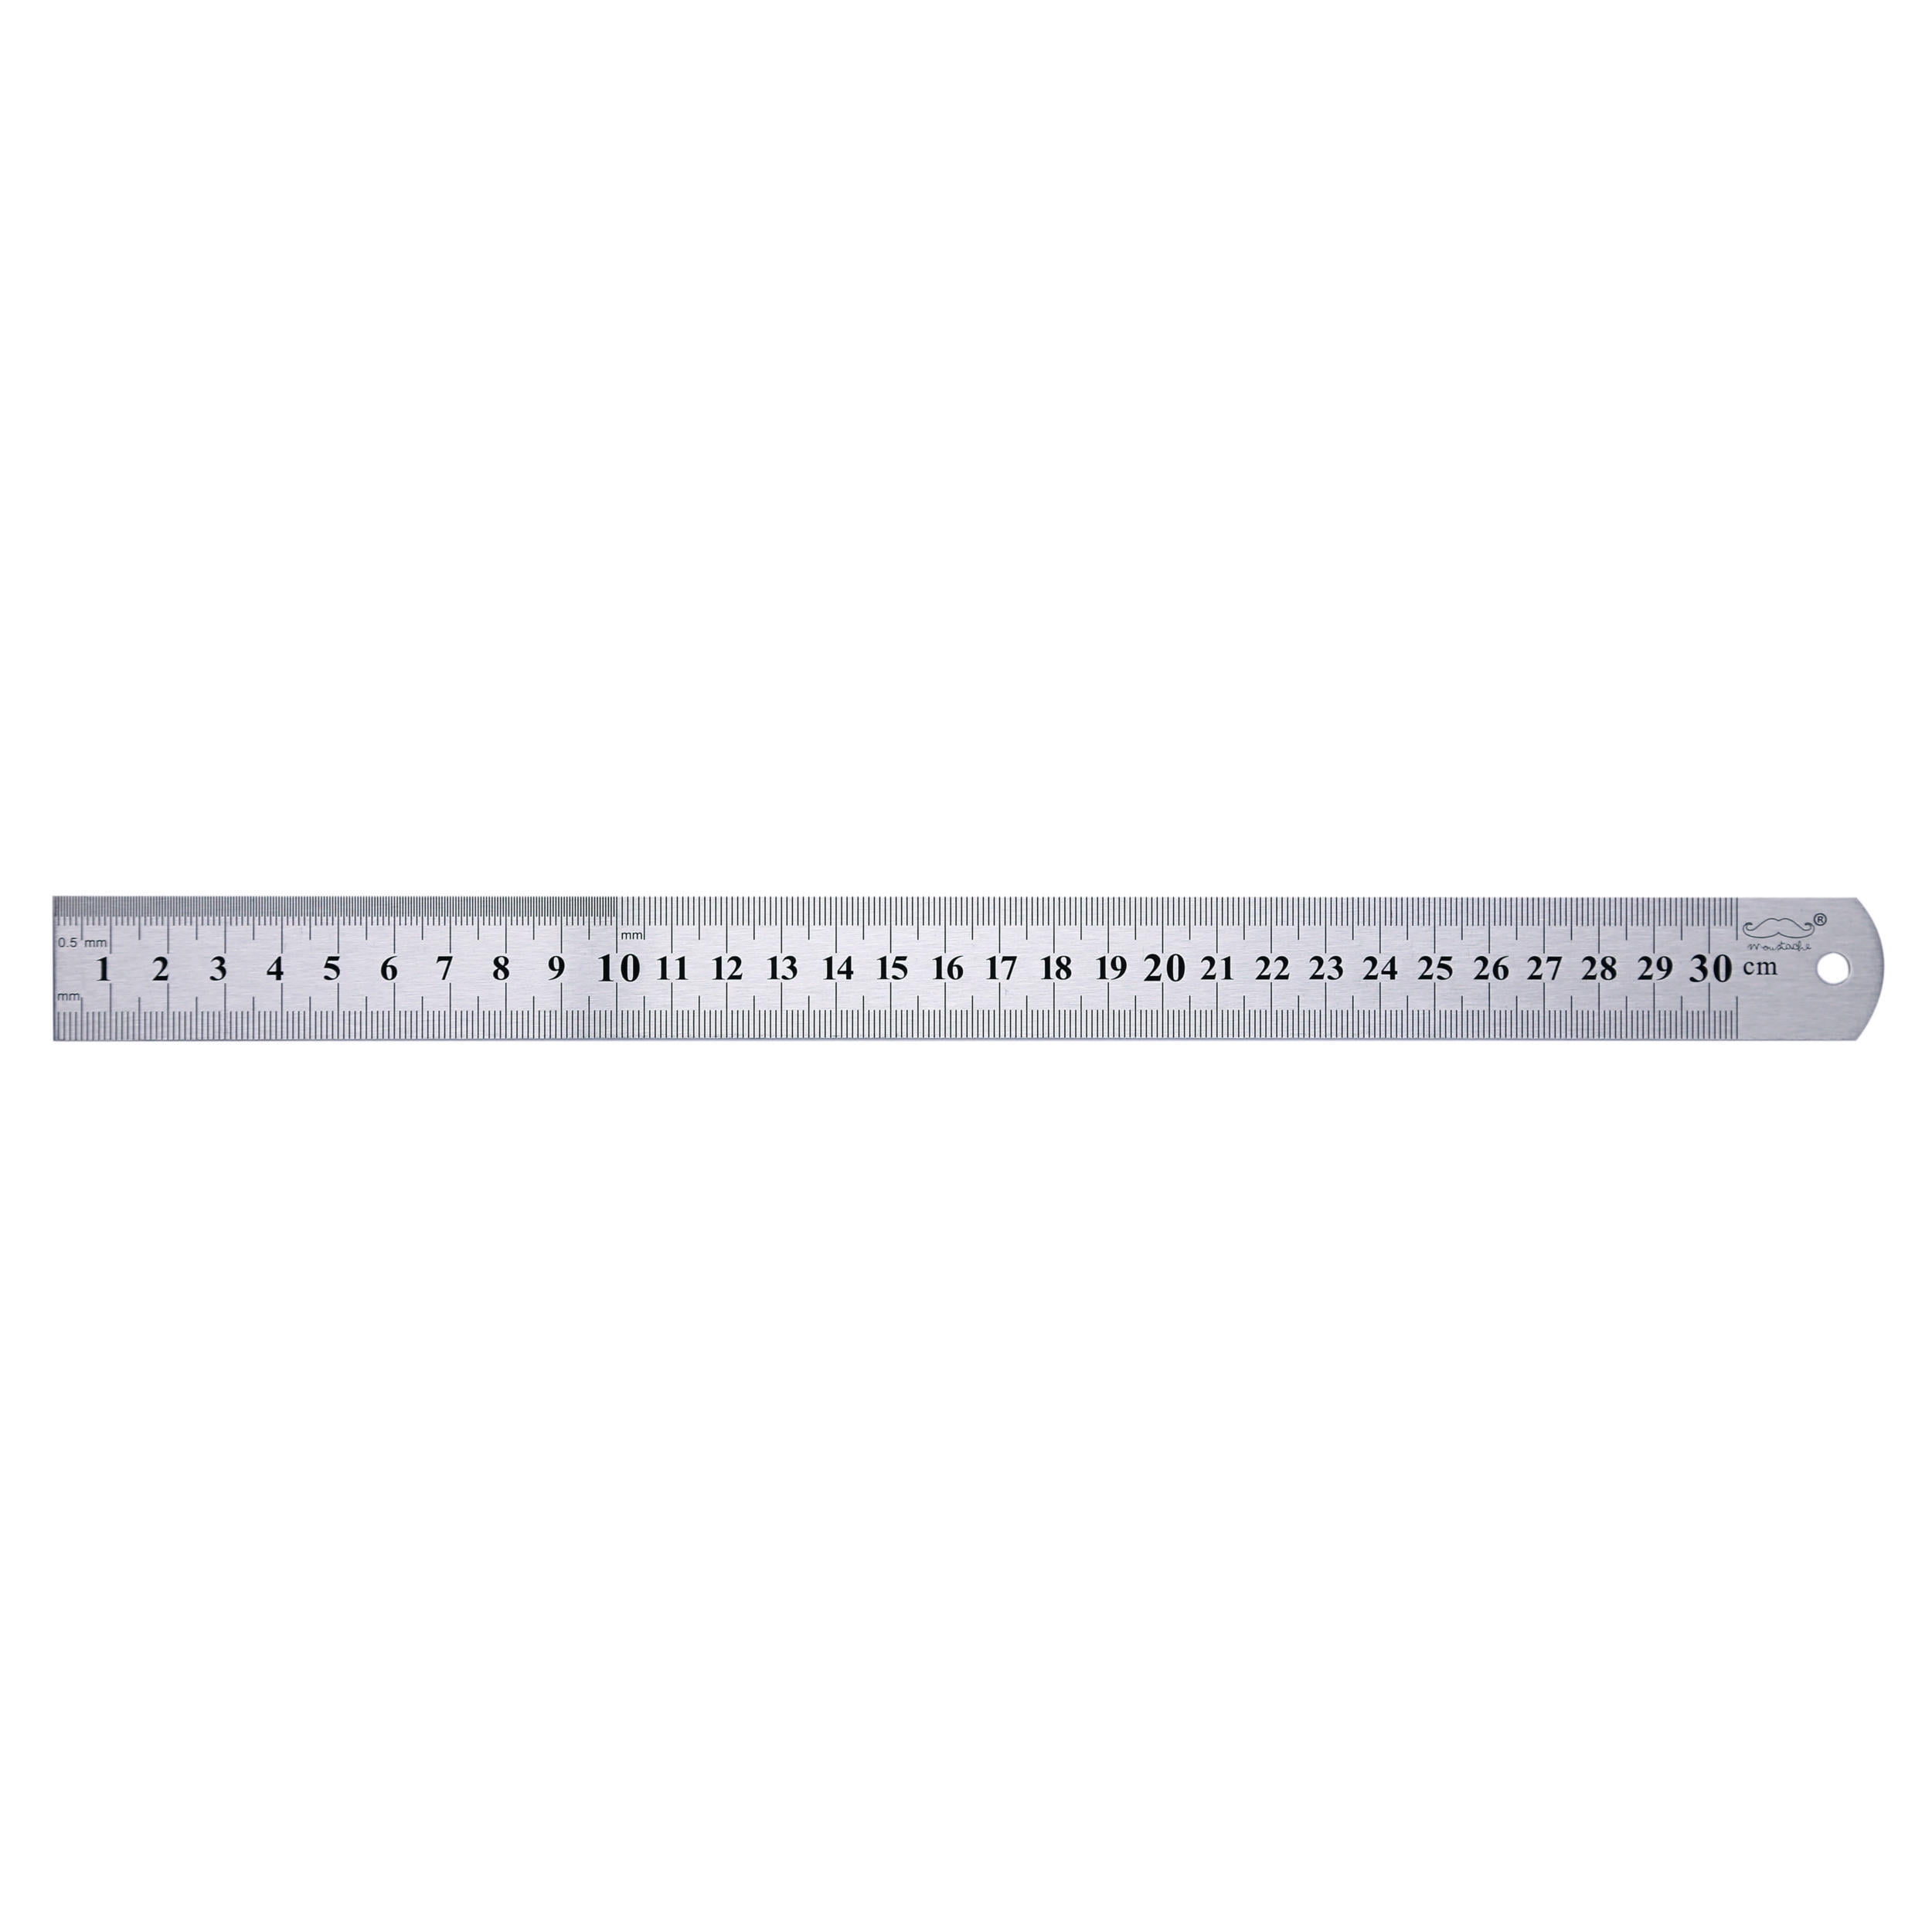 30cm ruler in inches